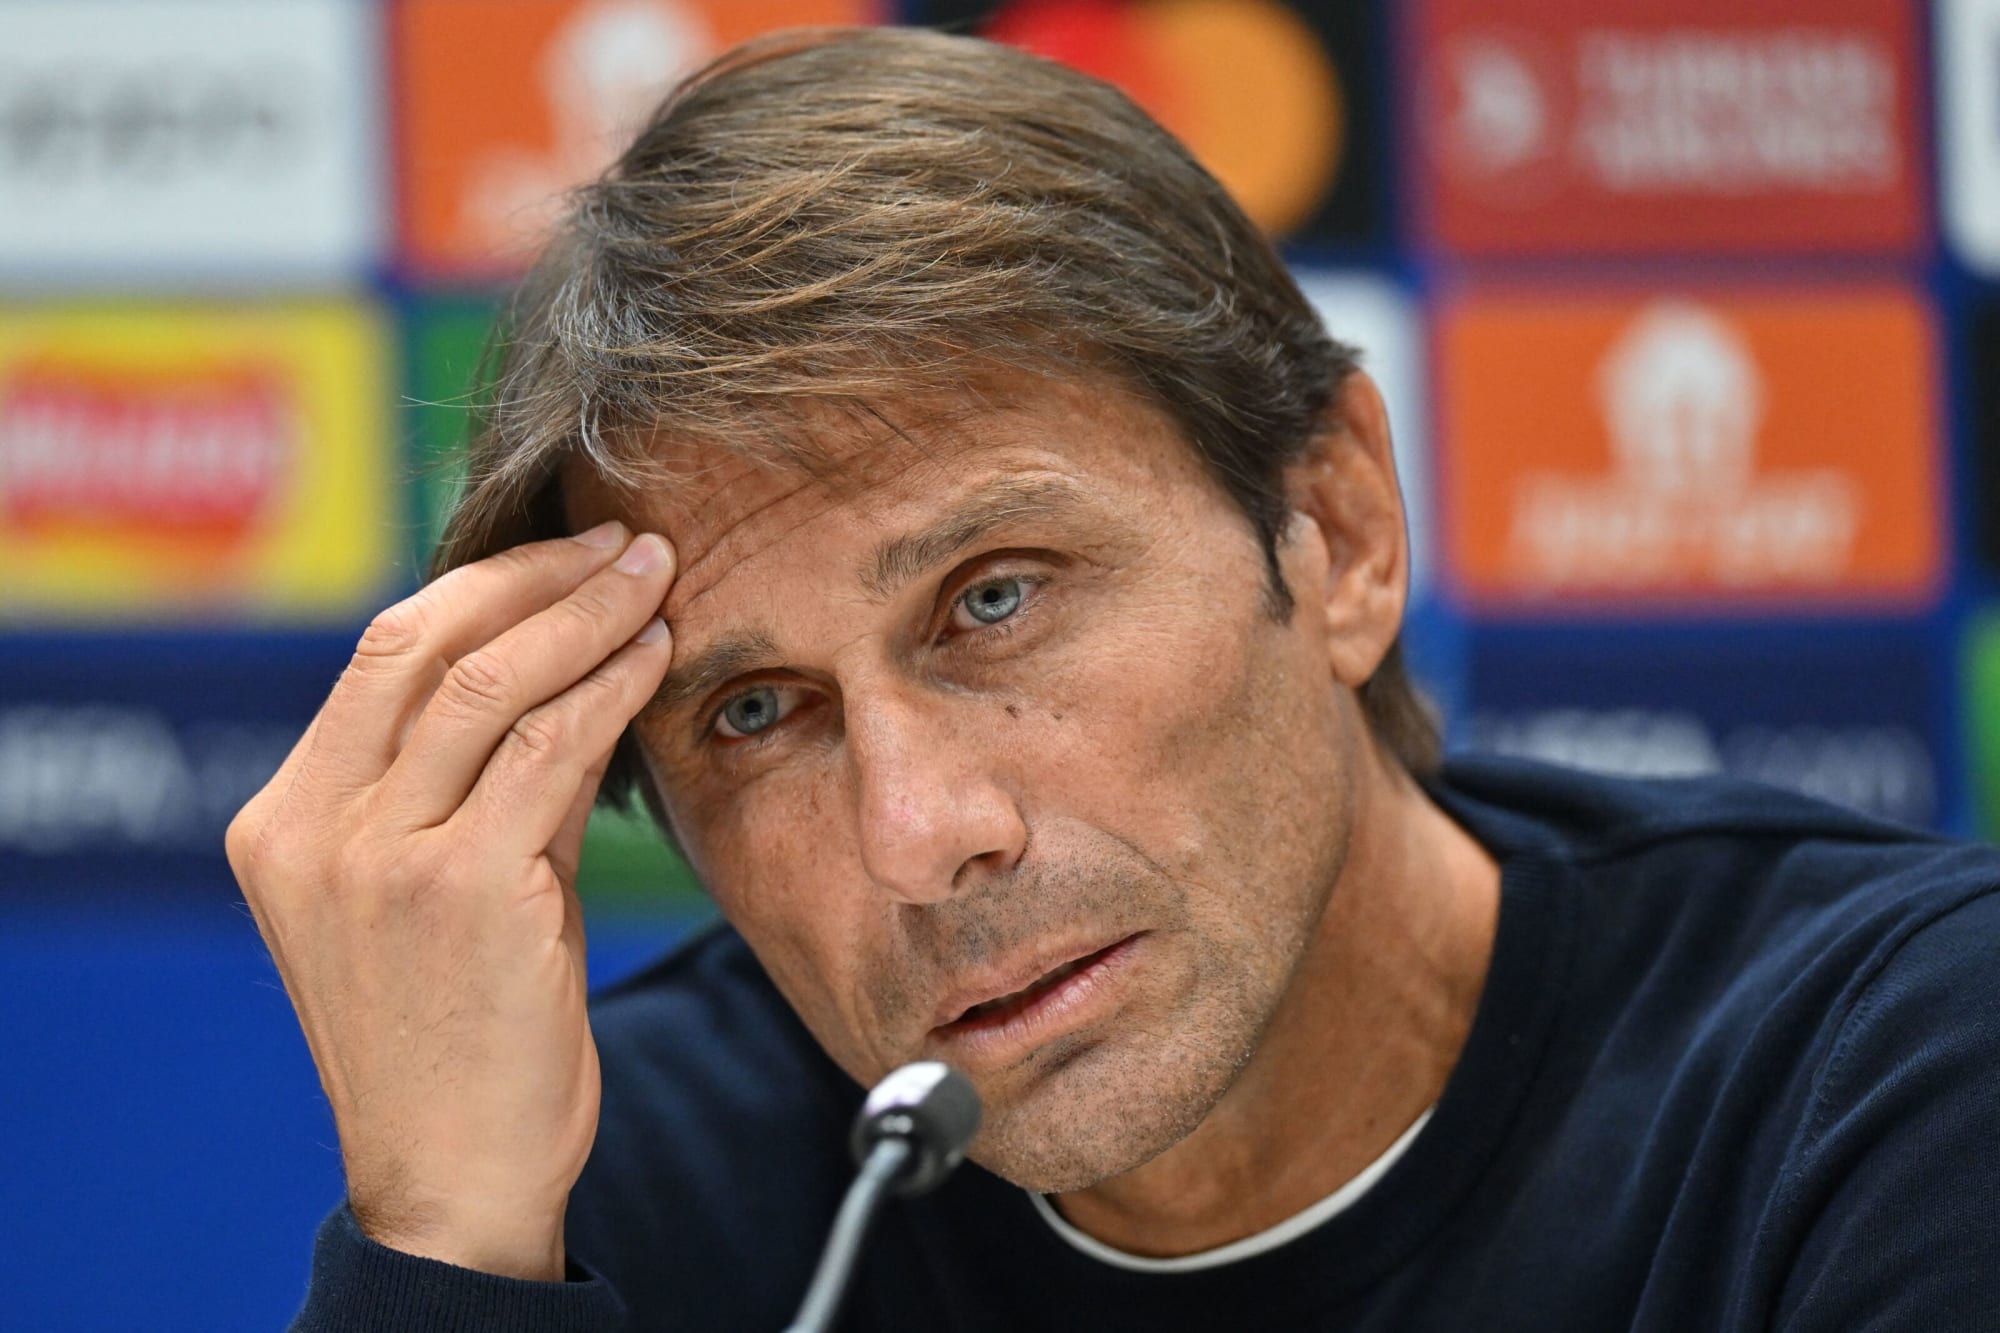 Time for Tottenham Hotspur fans to back not bail on Antonio Conte